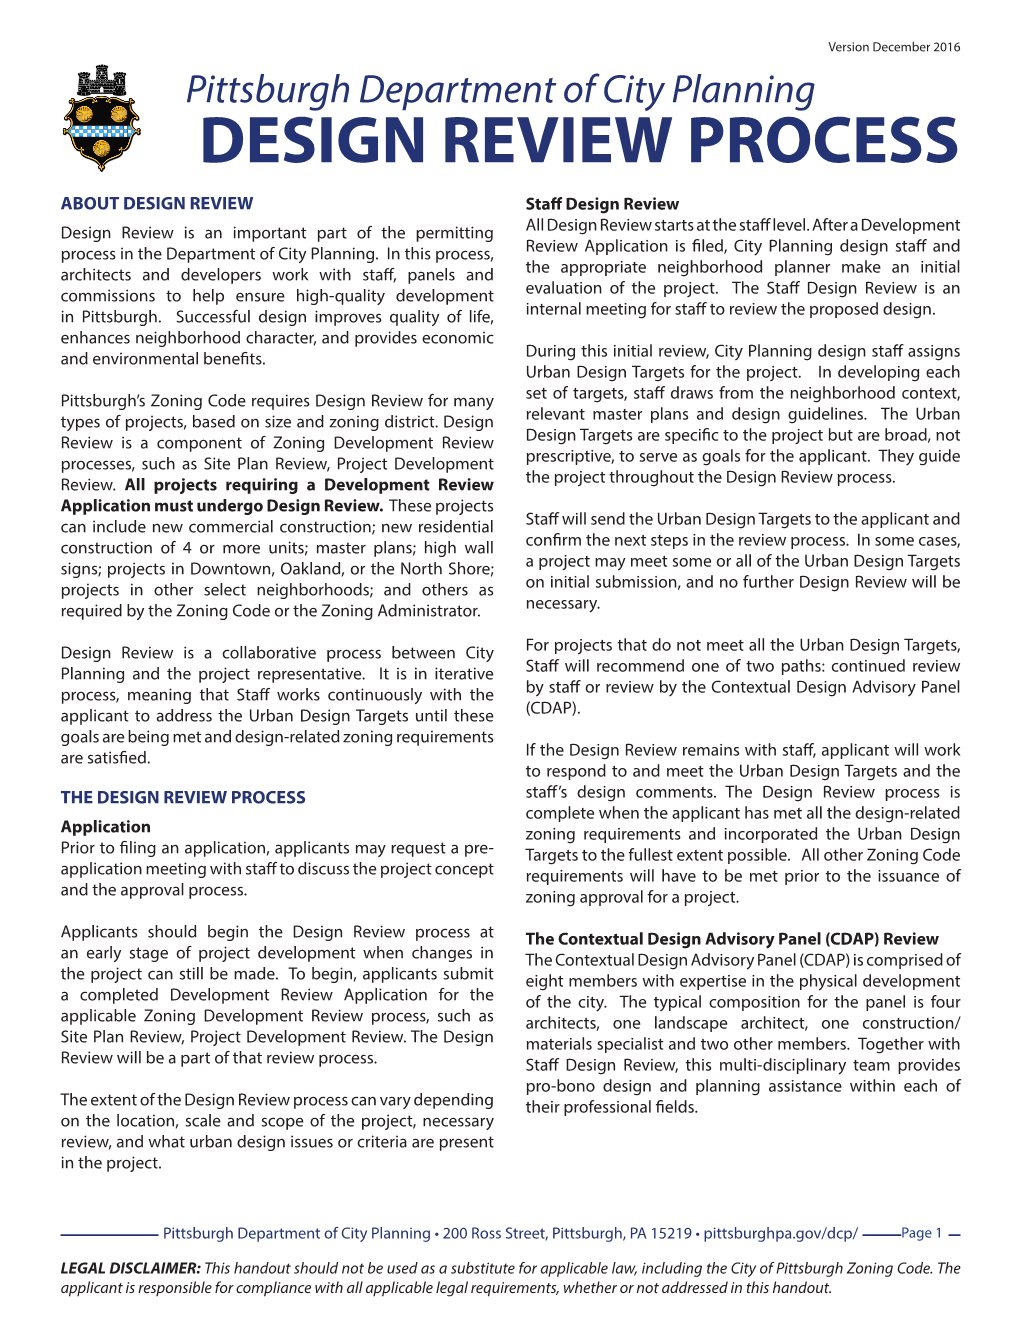 DESIGN REVIEW PROCESS ABOUT DESIGN REVIEW Staff Design Review Design Review Is an Important Part of the Permitting All Design Review Starts at the Staff Level